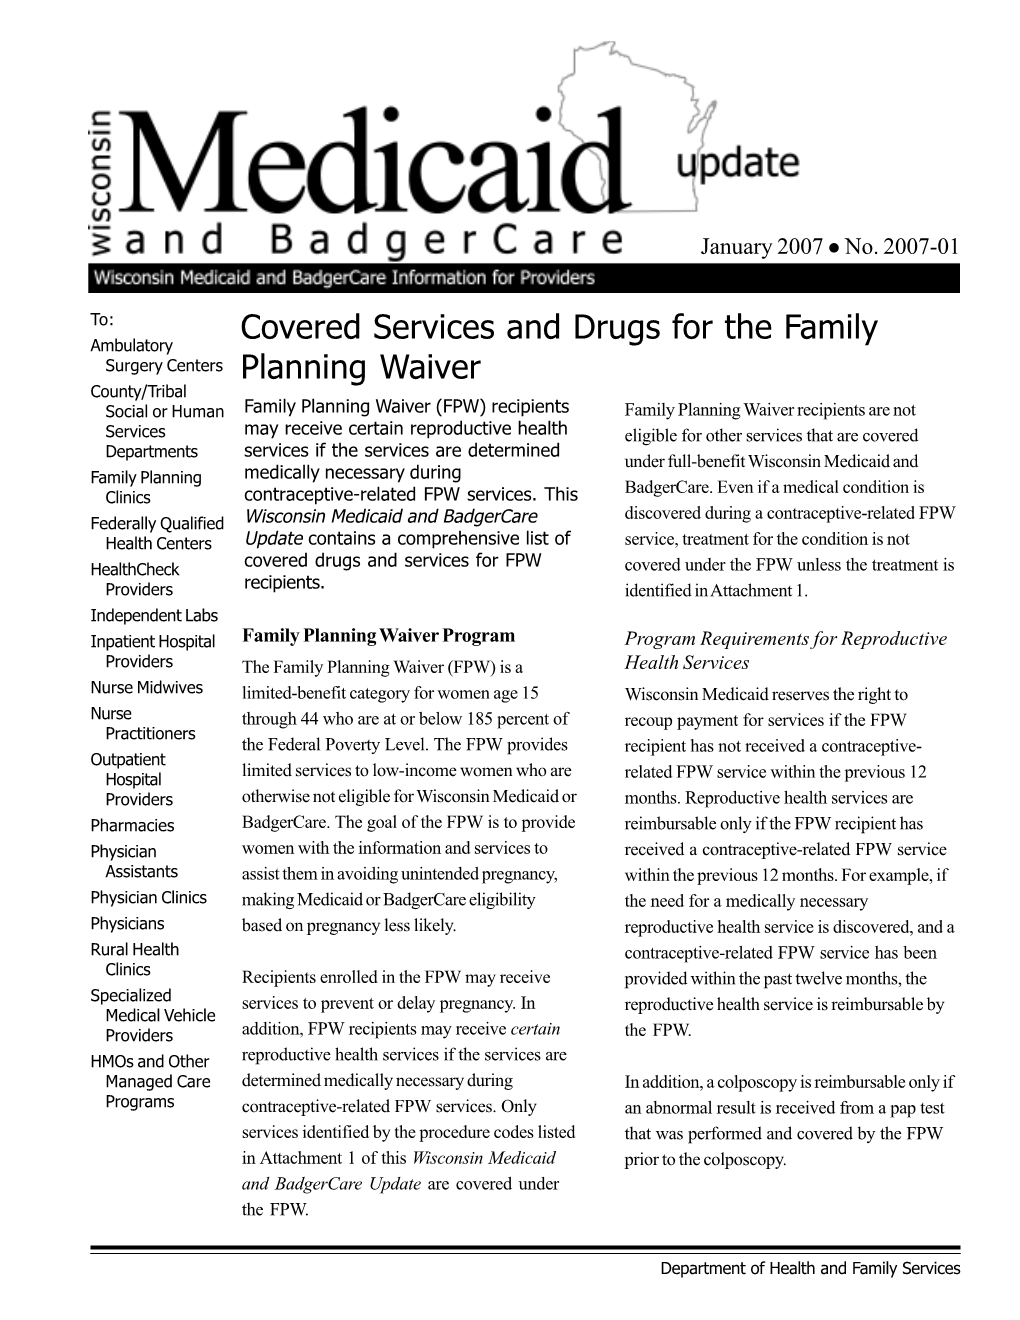 Covered Services and Drugs for the Family Planning Waiver